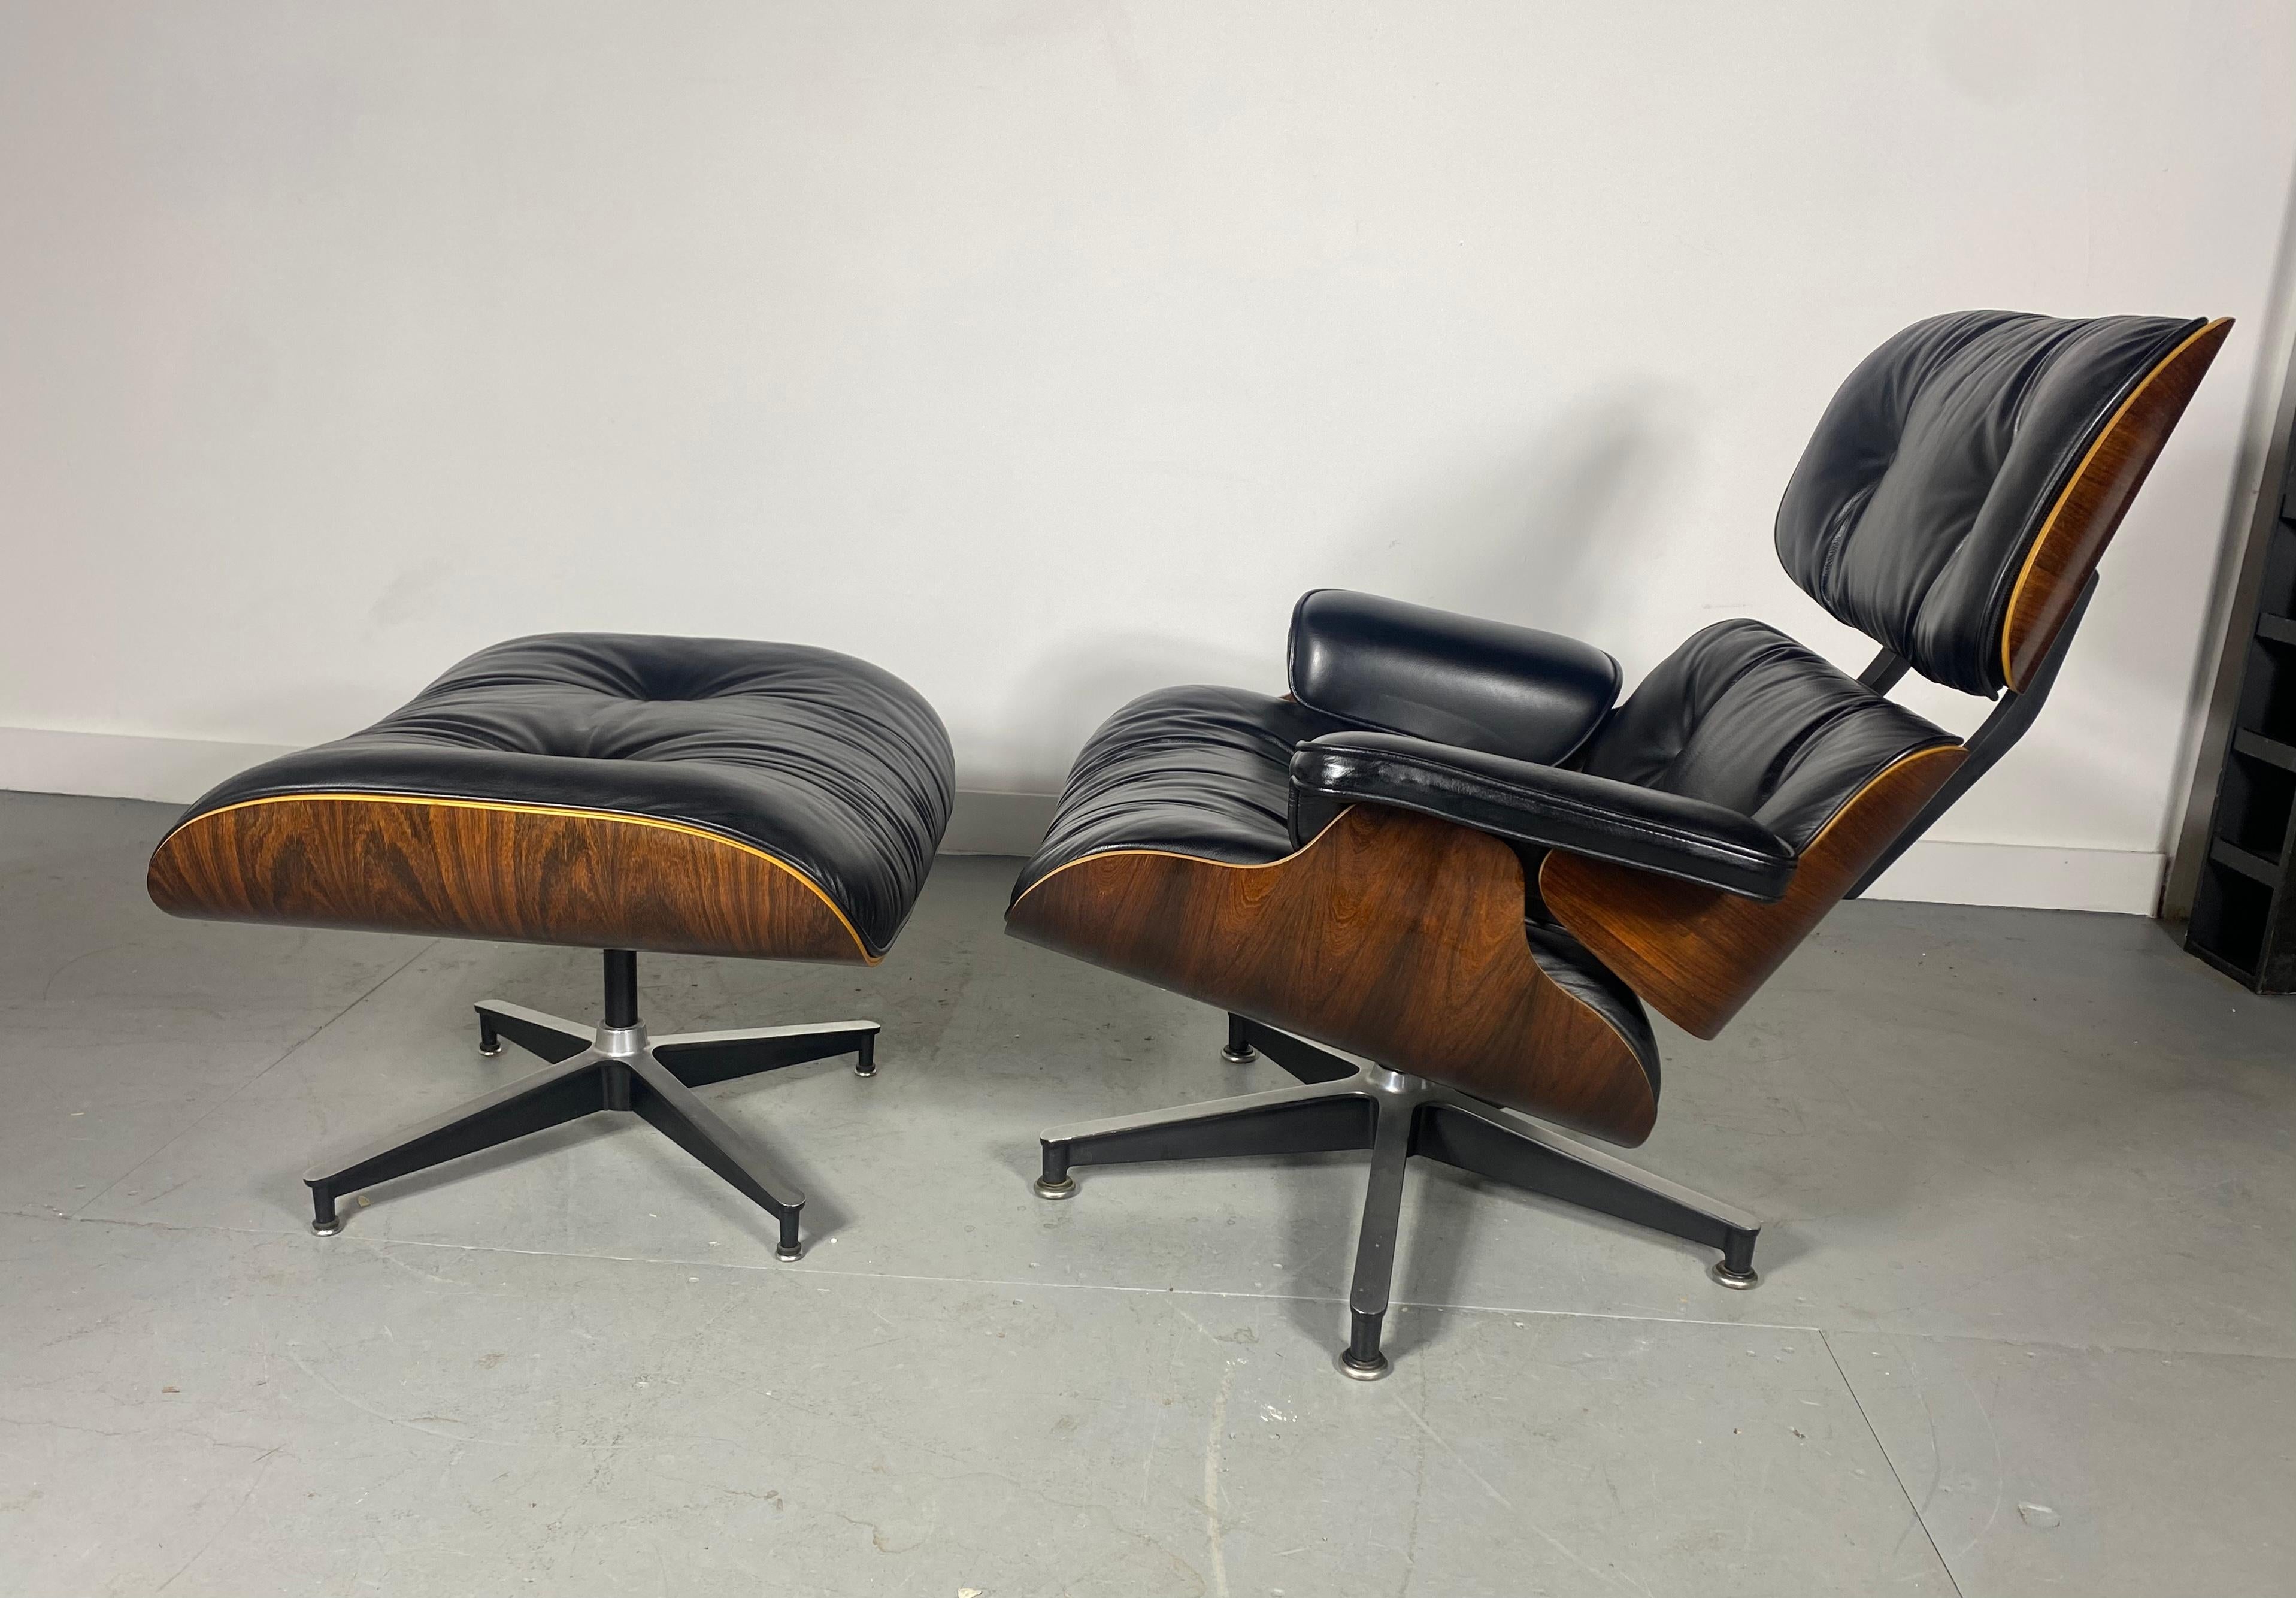 CLassic Brazilian Rosewood and Leather Eames Lounge Chair & Ott Herman Miller 1